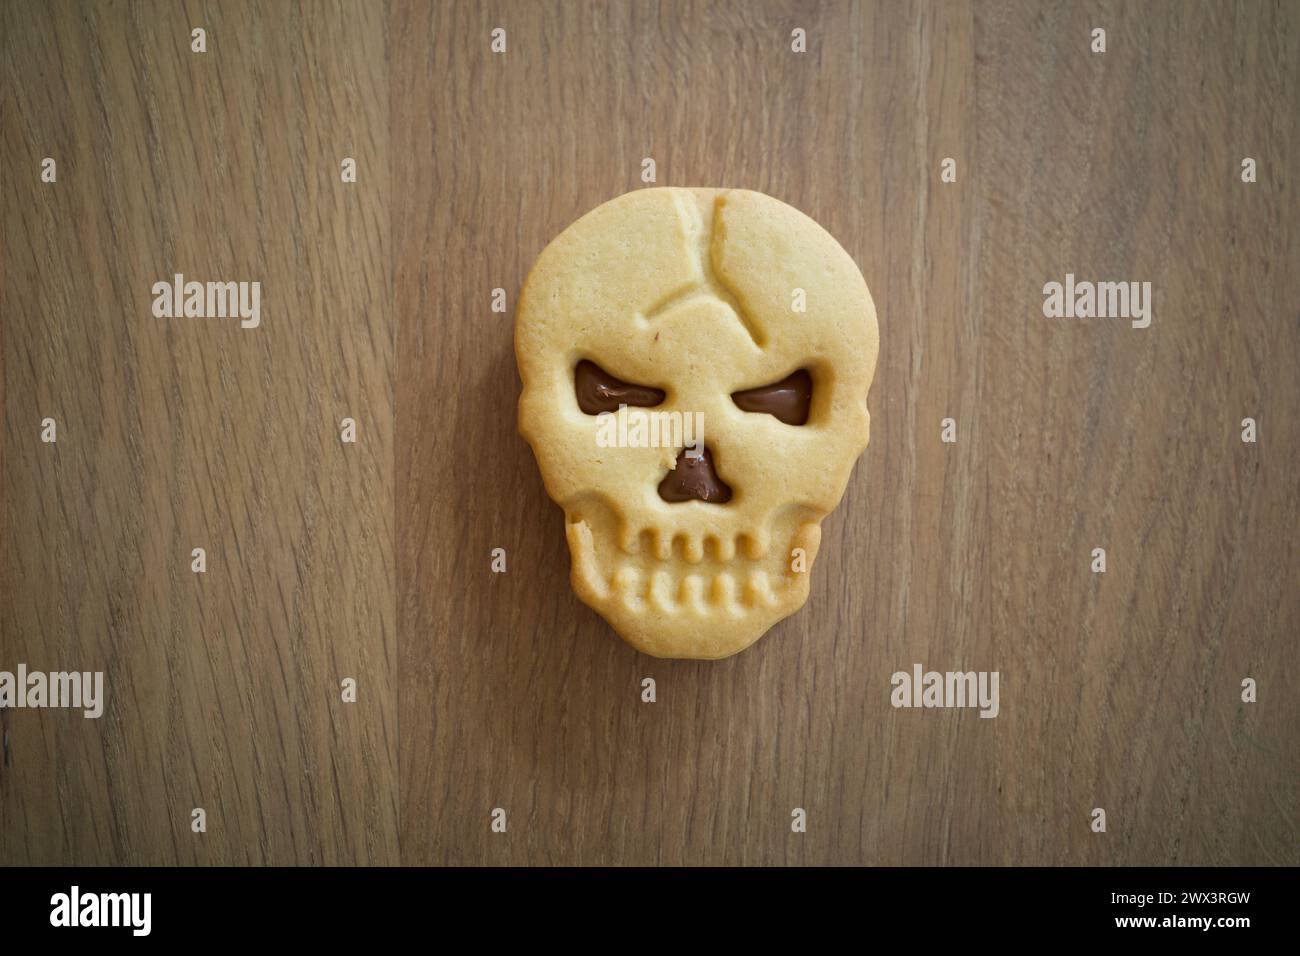 Skull shaped cookie for Halloween events Stock Photo